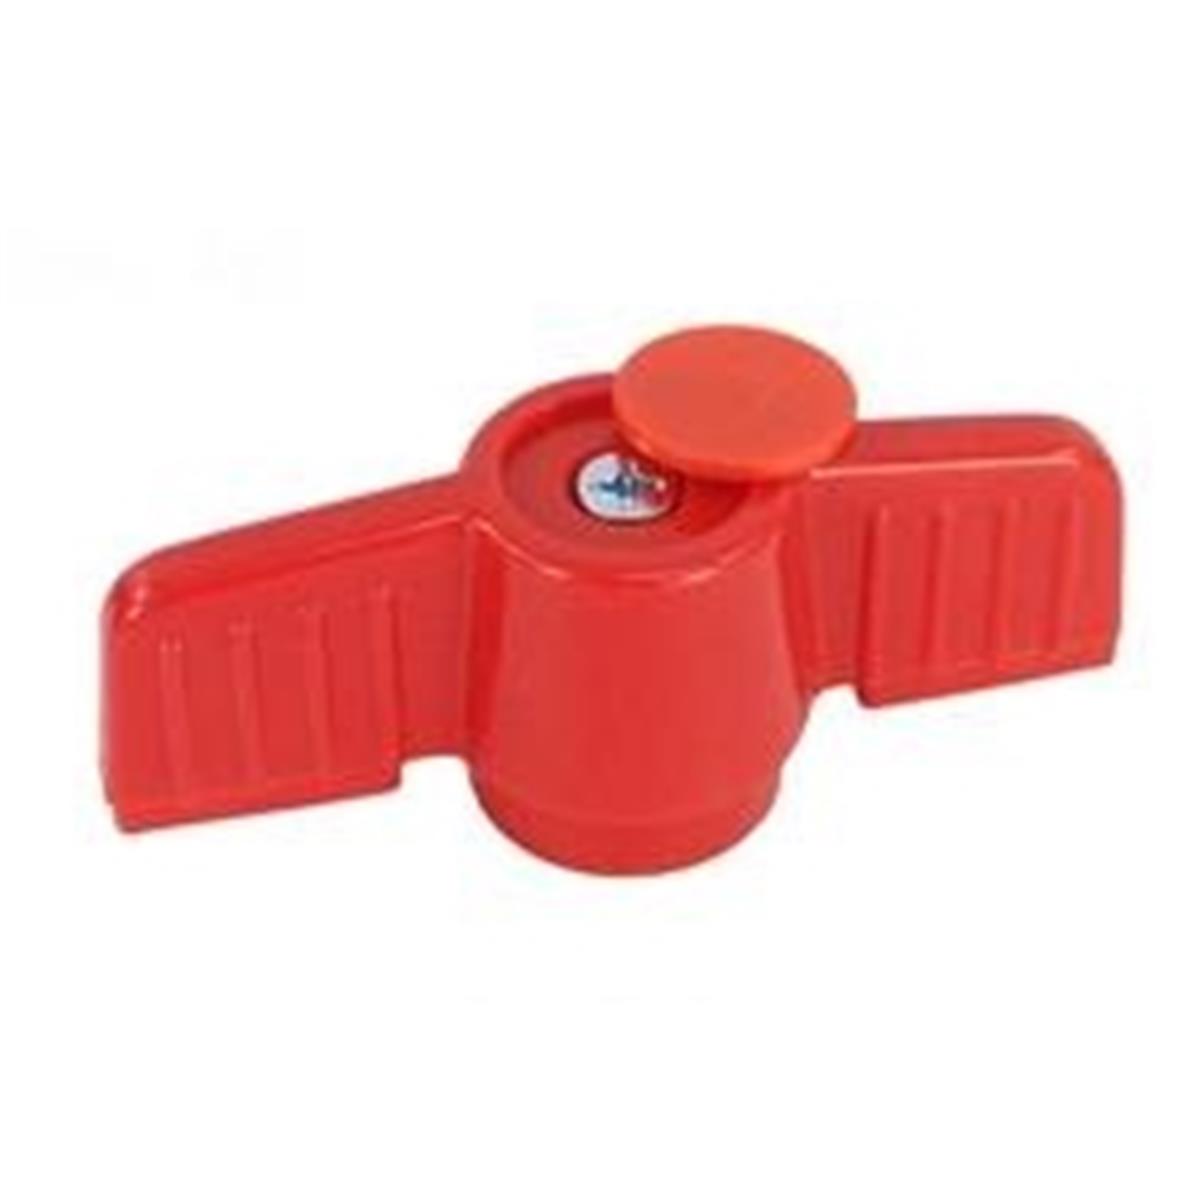 Picture of American Granby HMIP150HANDLE 1.5 in. Ball Valve Handle PVC, Red